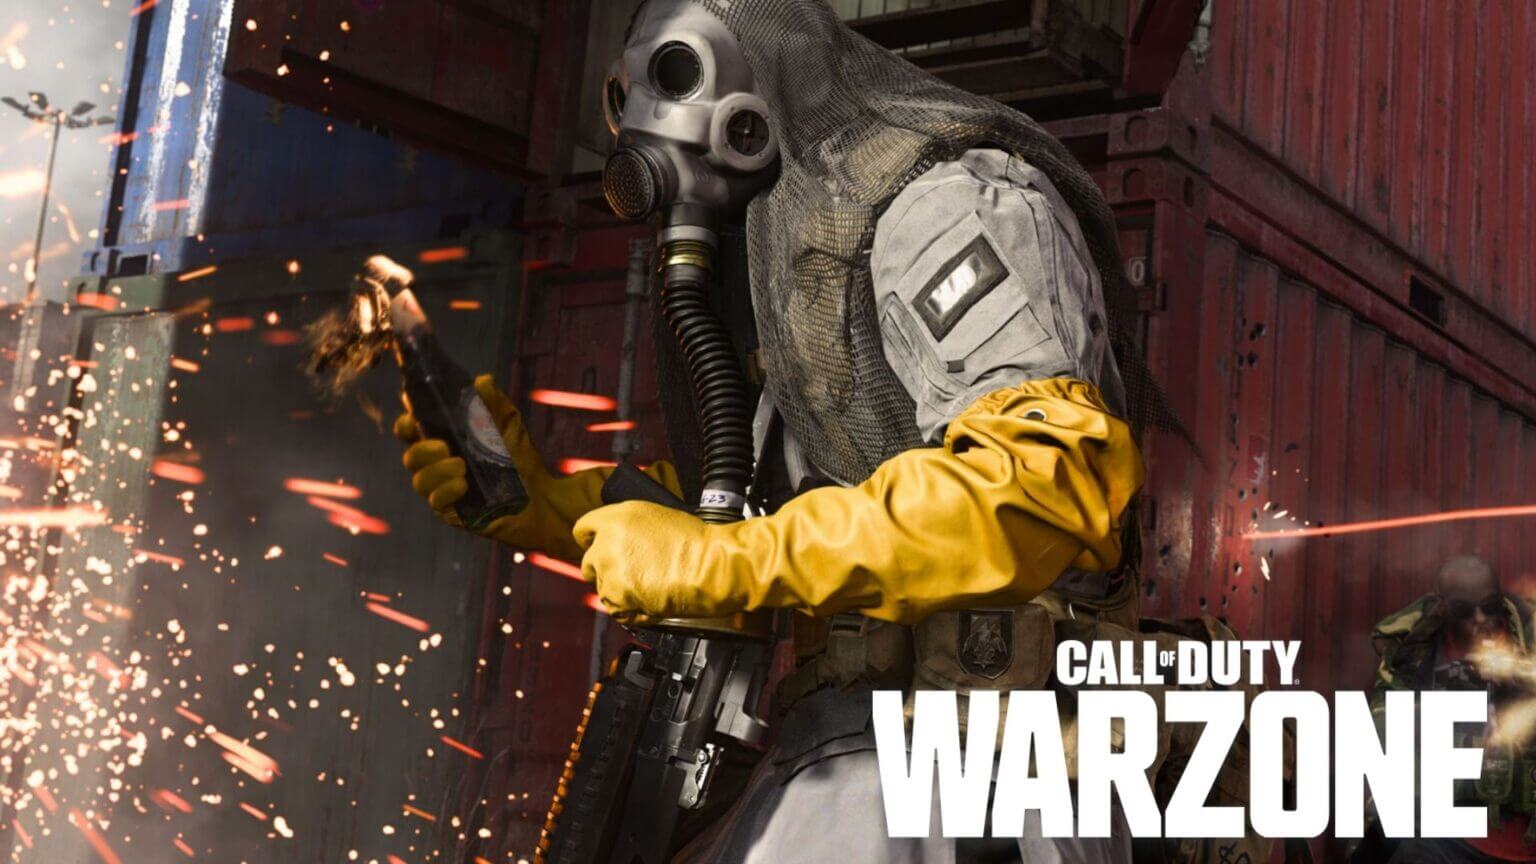 Unbreakable-Gas-Mask-glitch-returns-in-Warzone-Season-3-FEATURED-1536x864